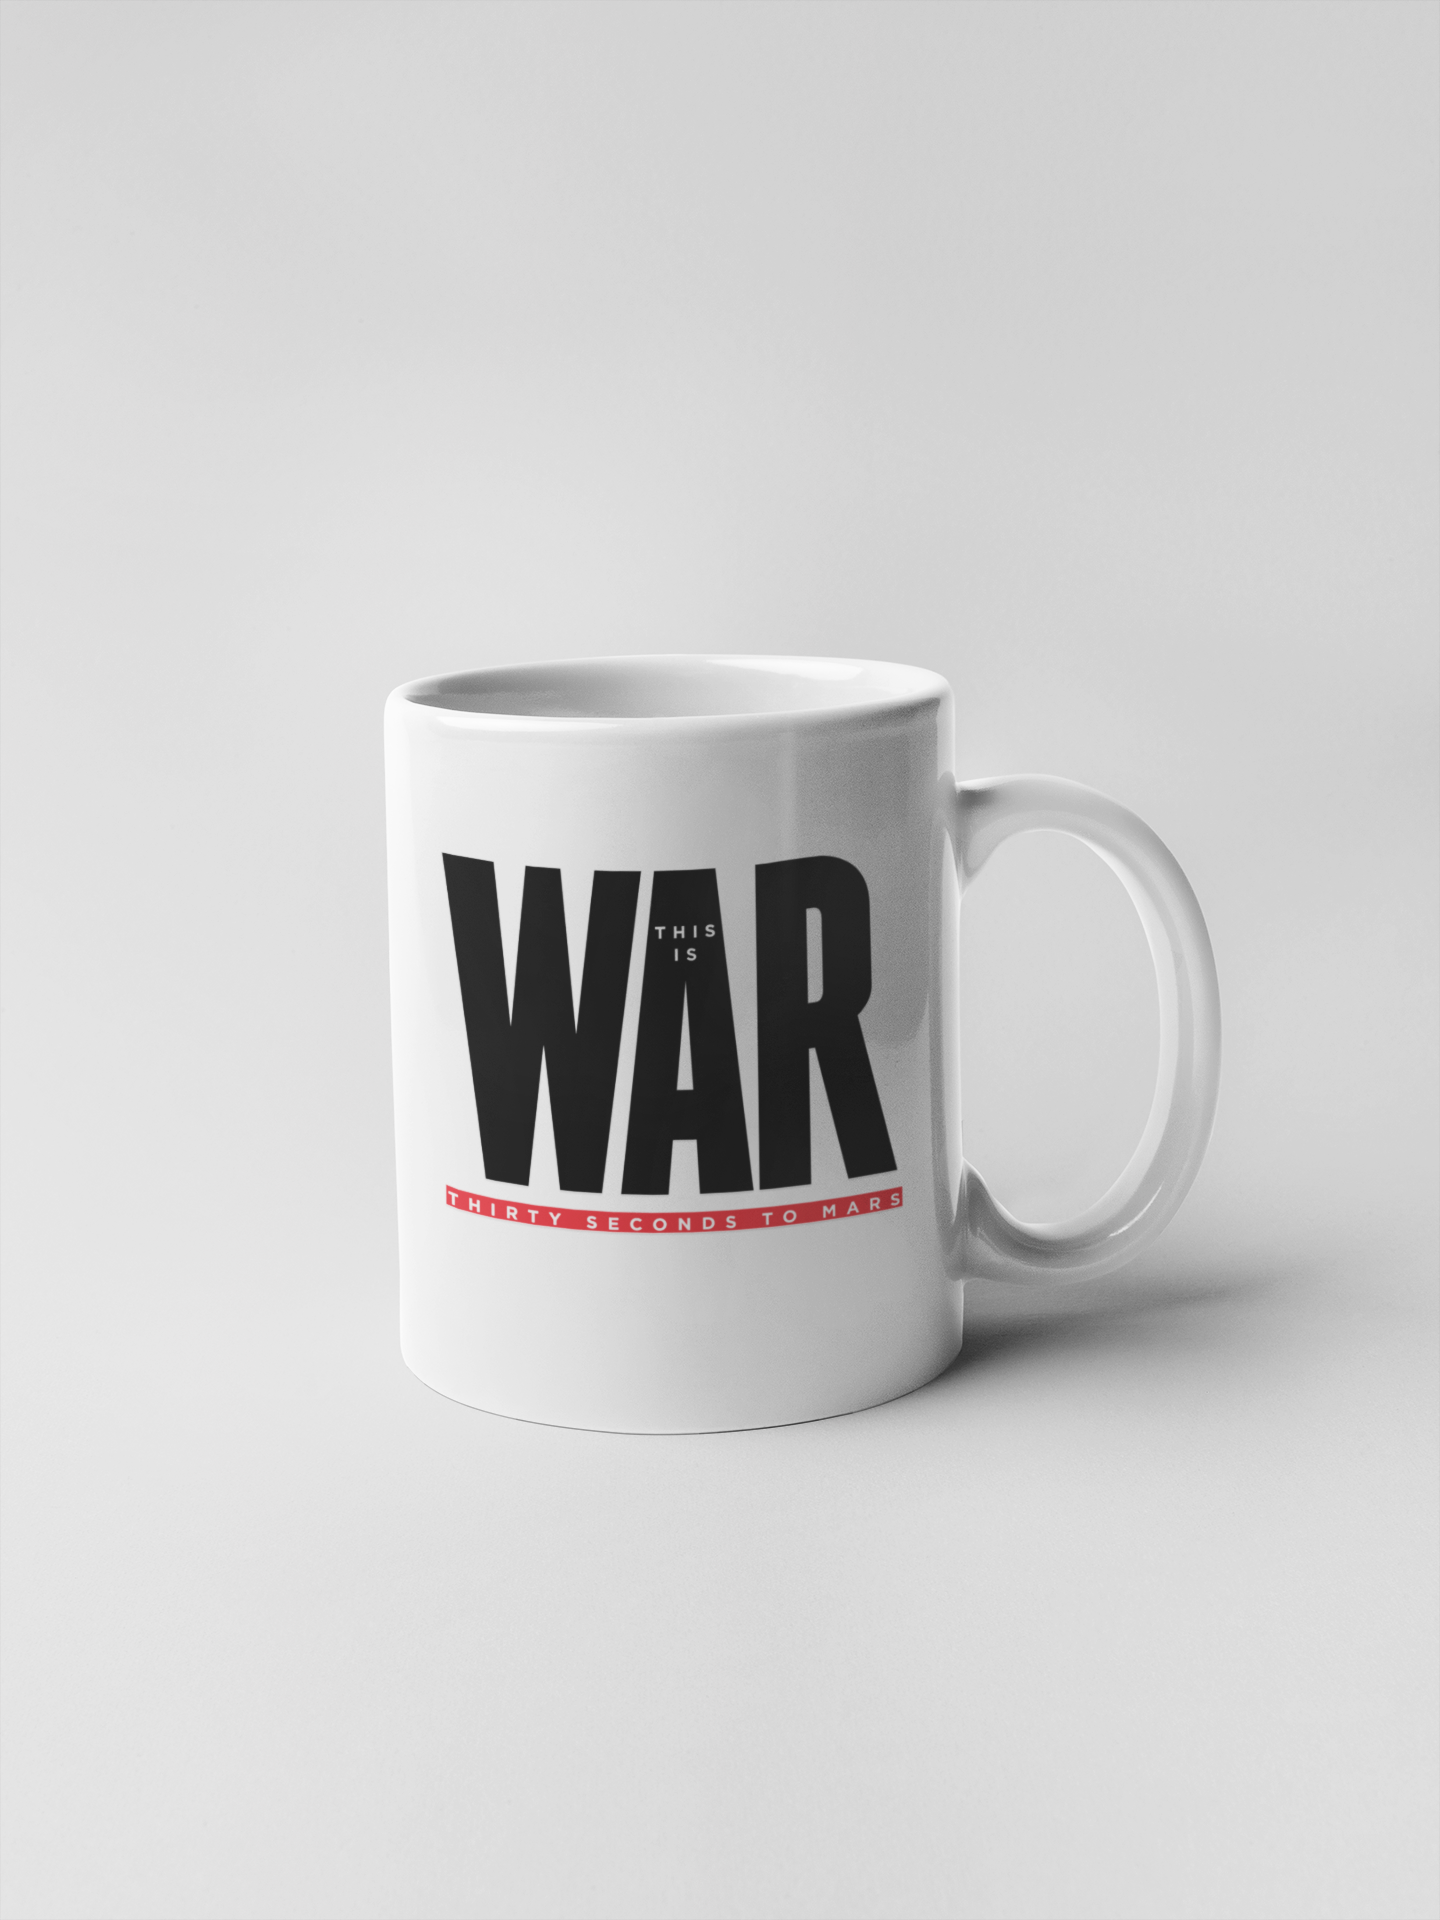 30 Seconds to Mars This is War Ceramic Coffee Mugs